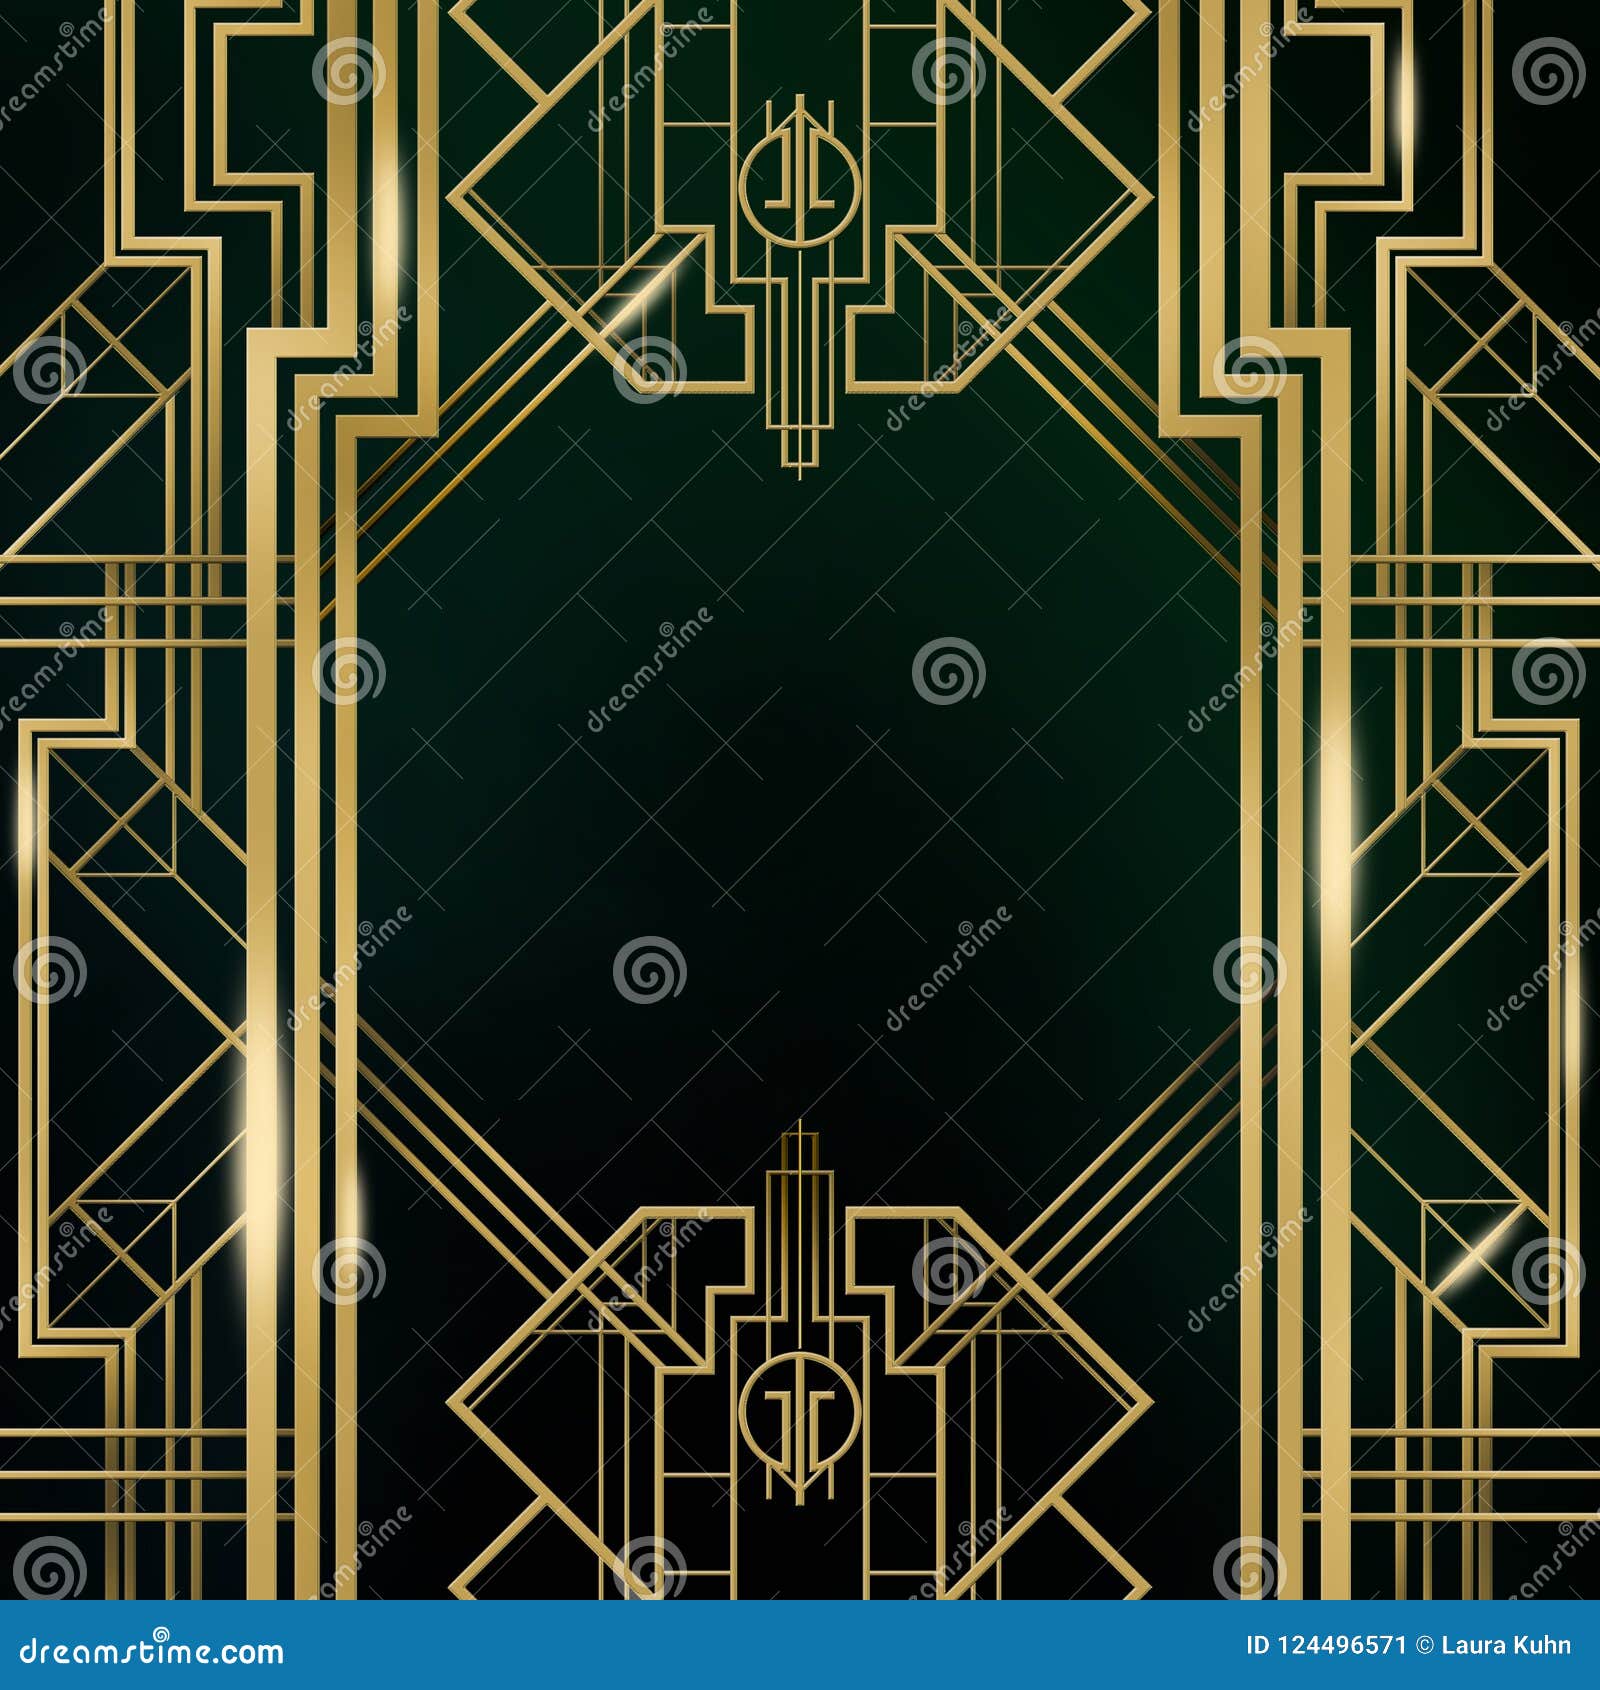 great gatsby movie inspiration film backdrop background poster